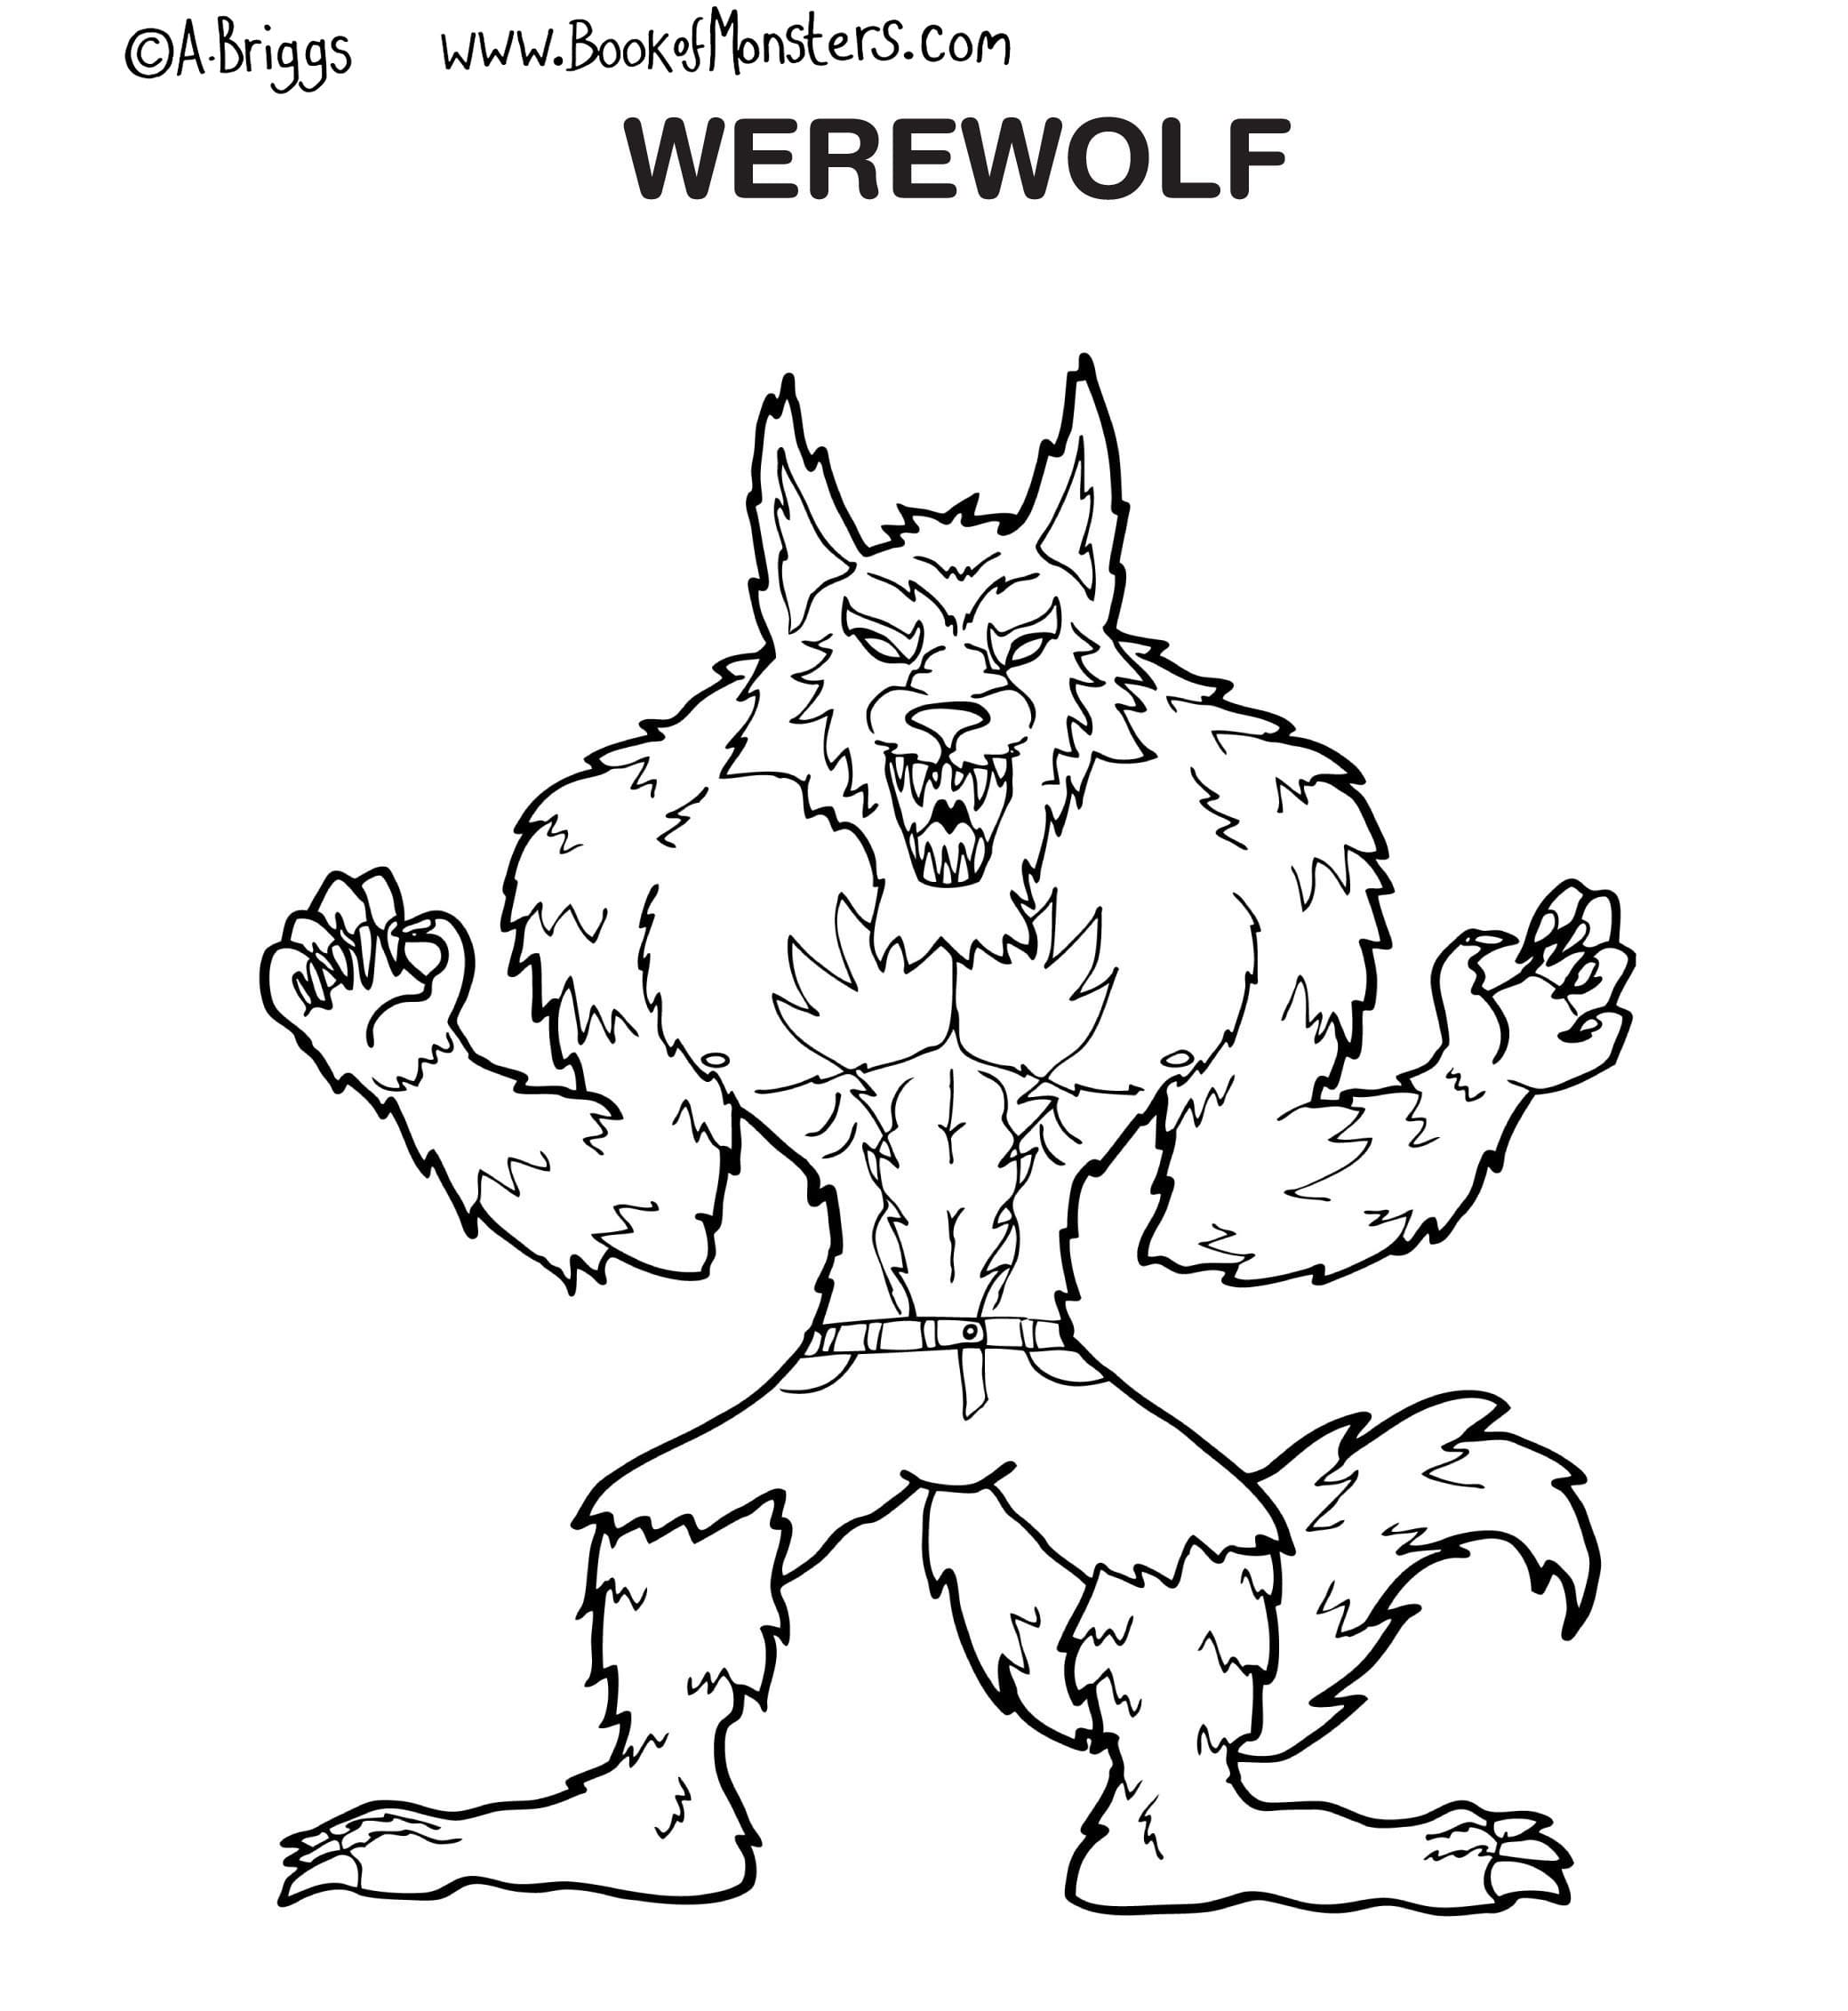 Free Werewolf To Print Coloring Page